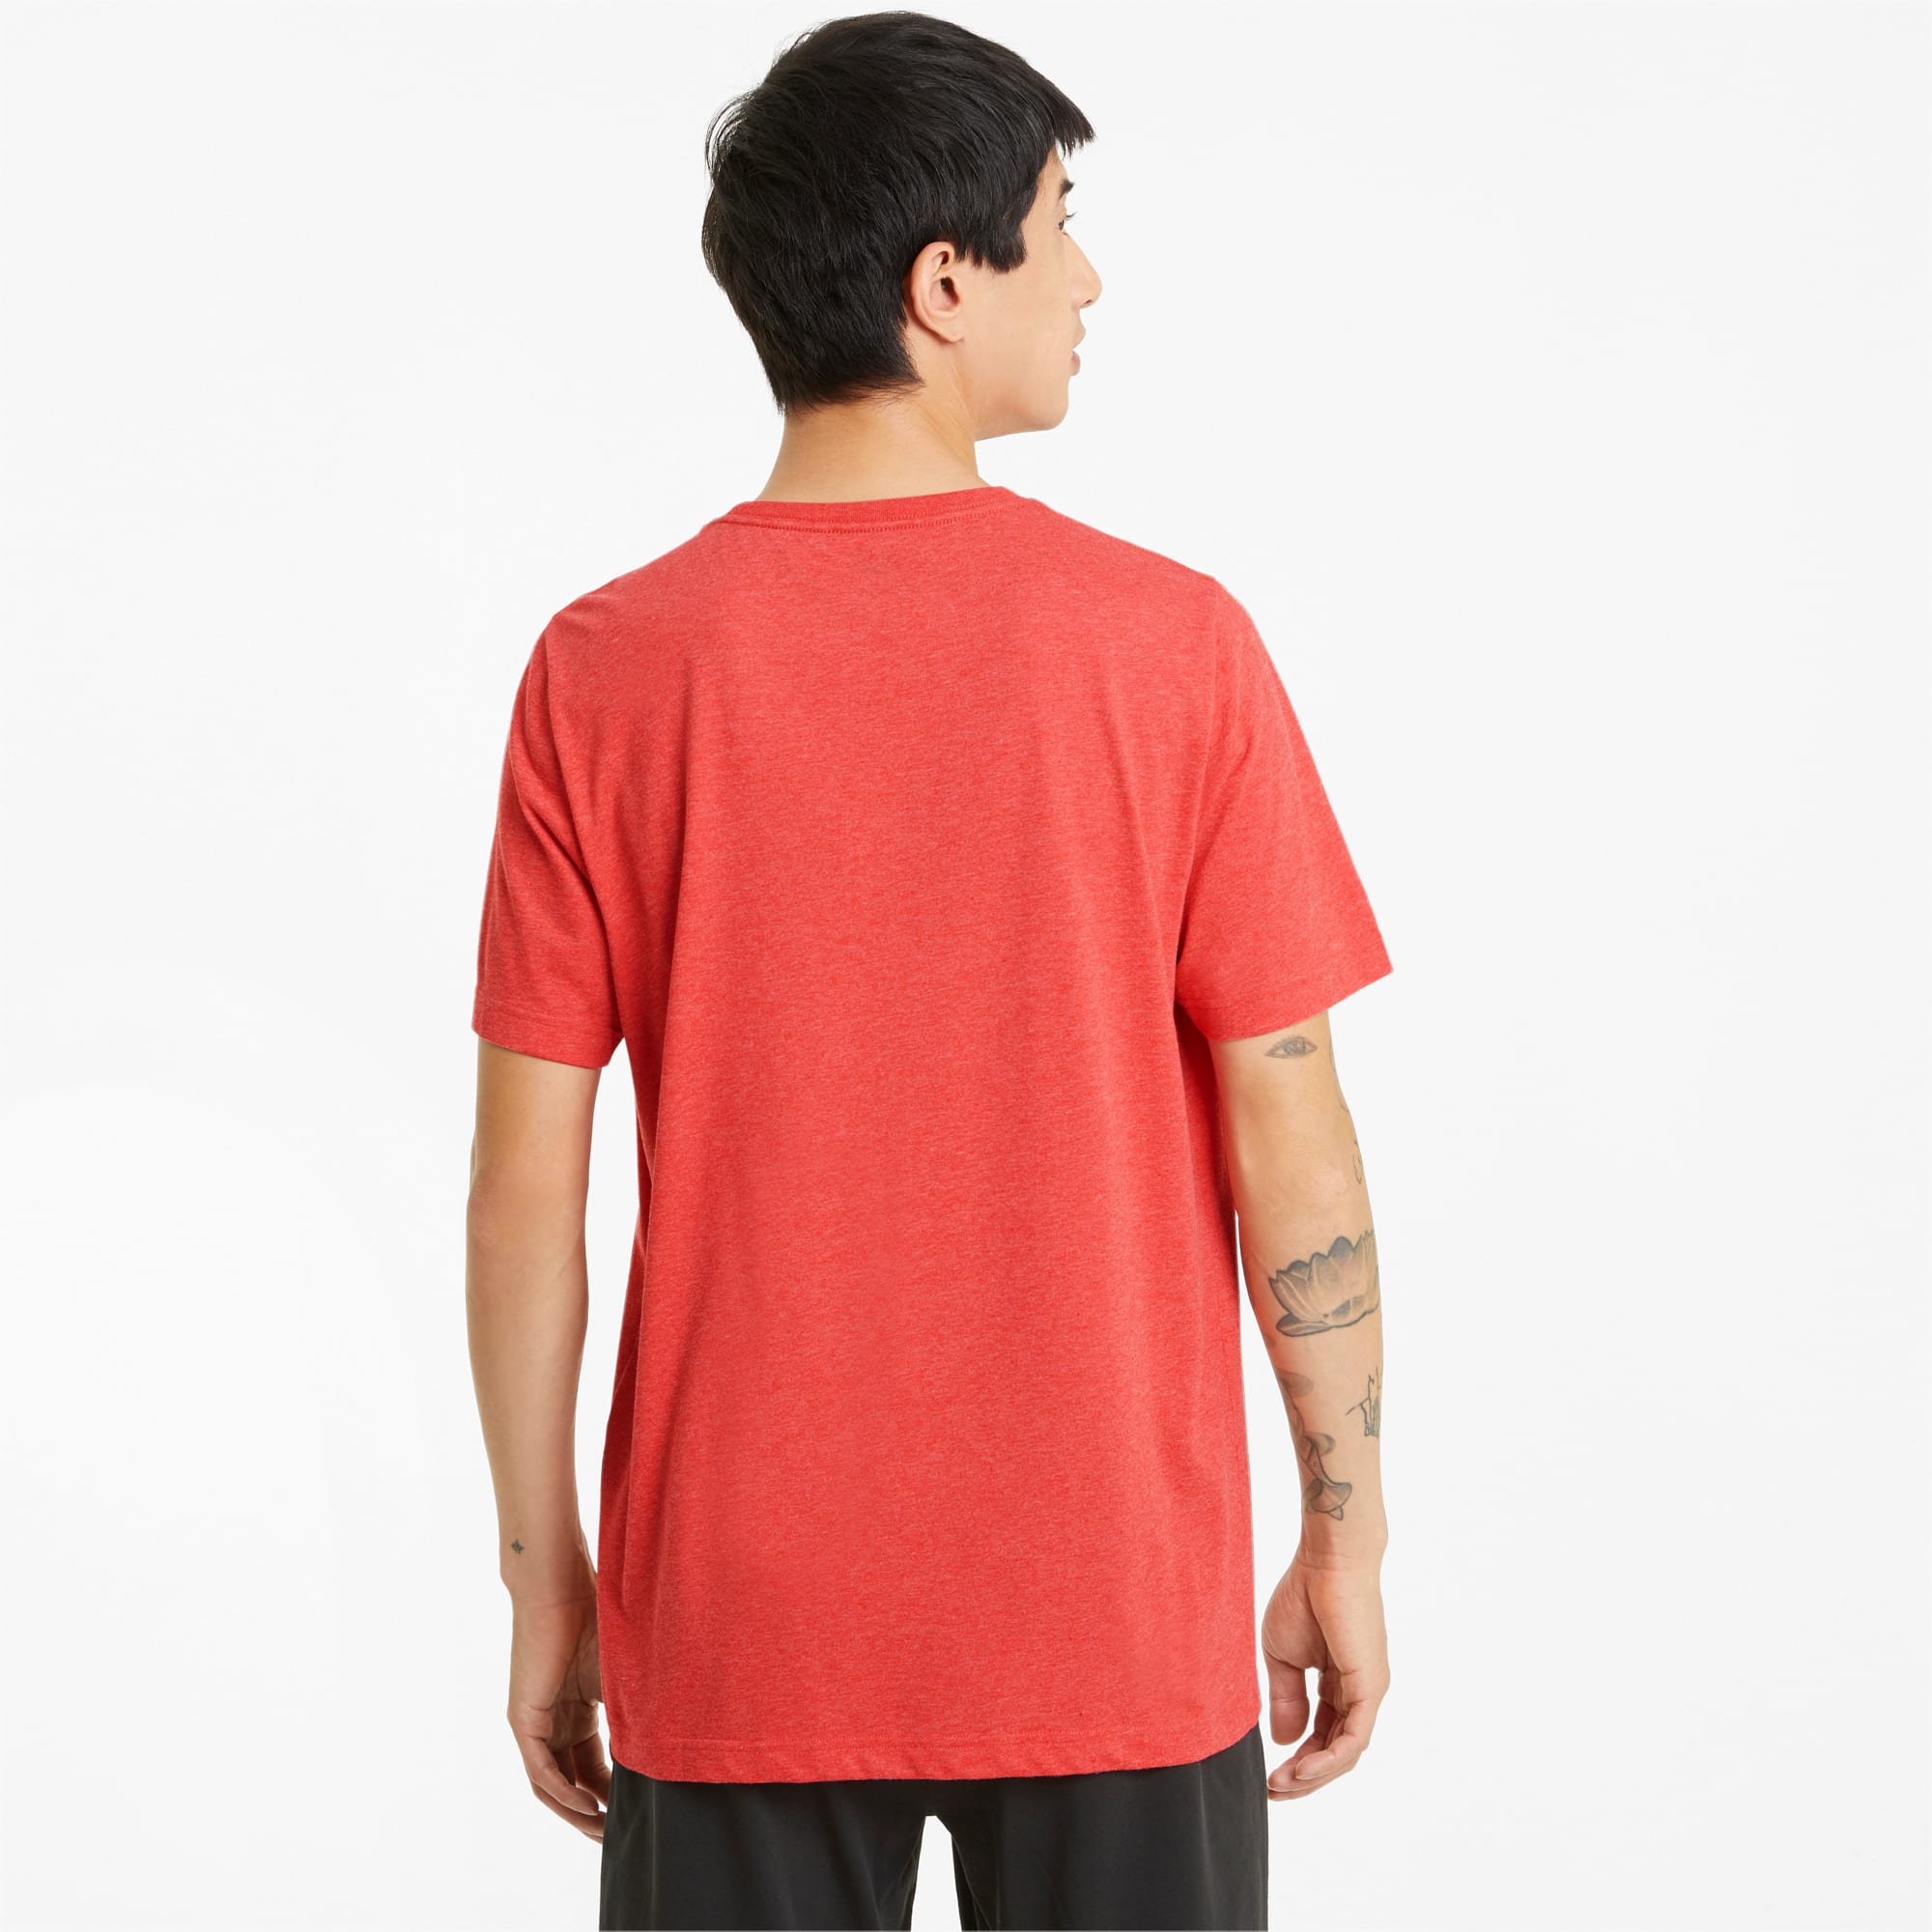 PUMA Essentials Heather Men's T-Shirt, High Risk Red, Size S, Clothing